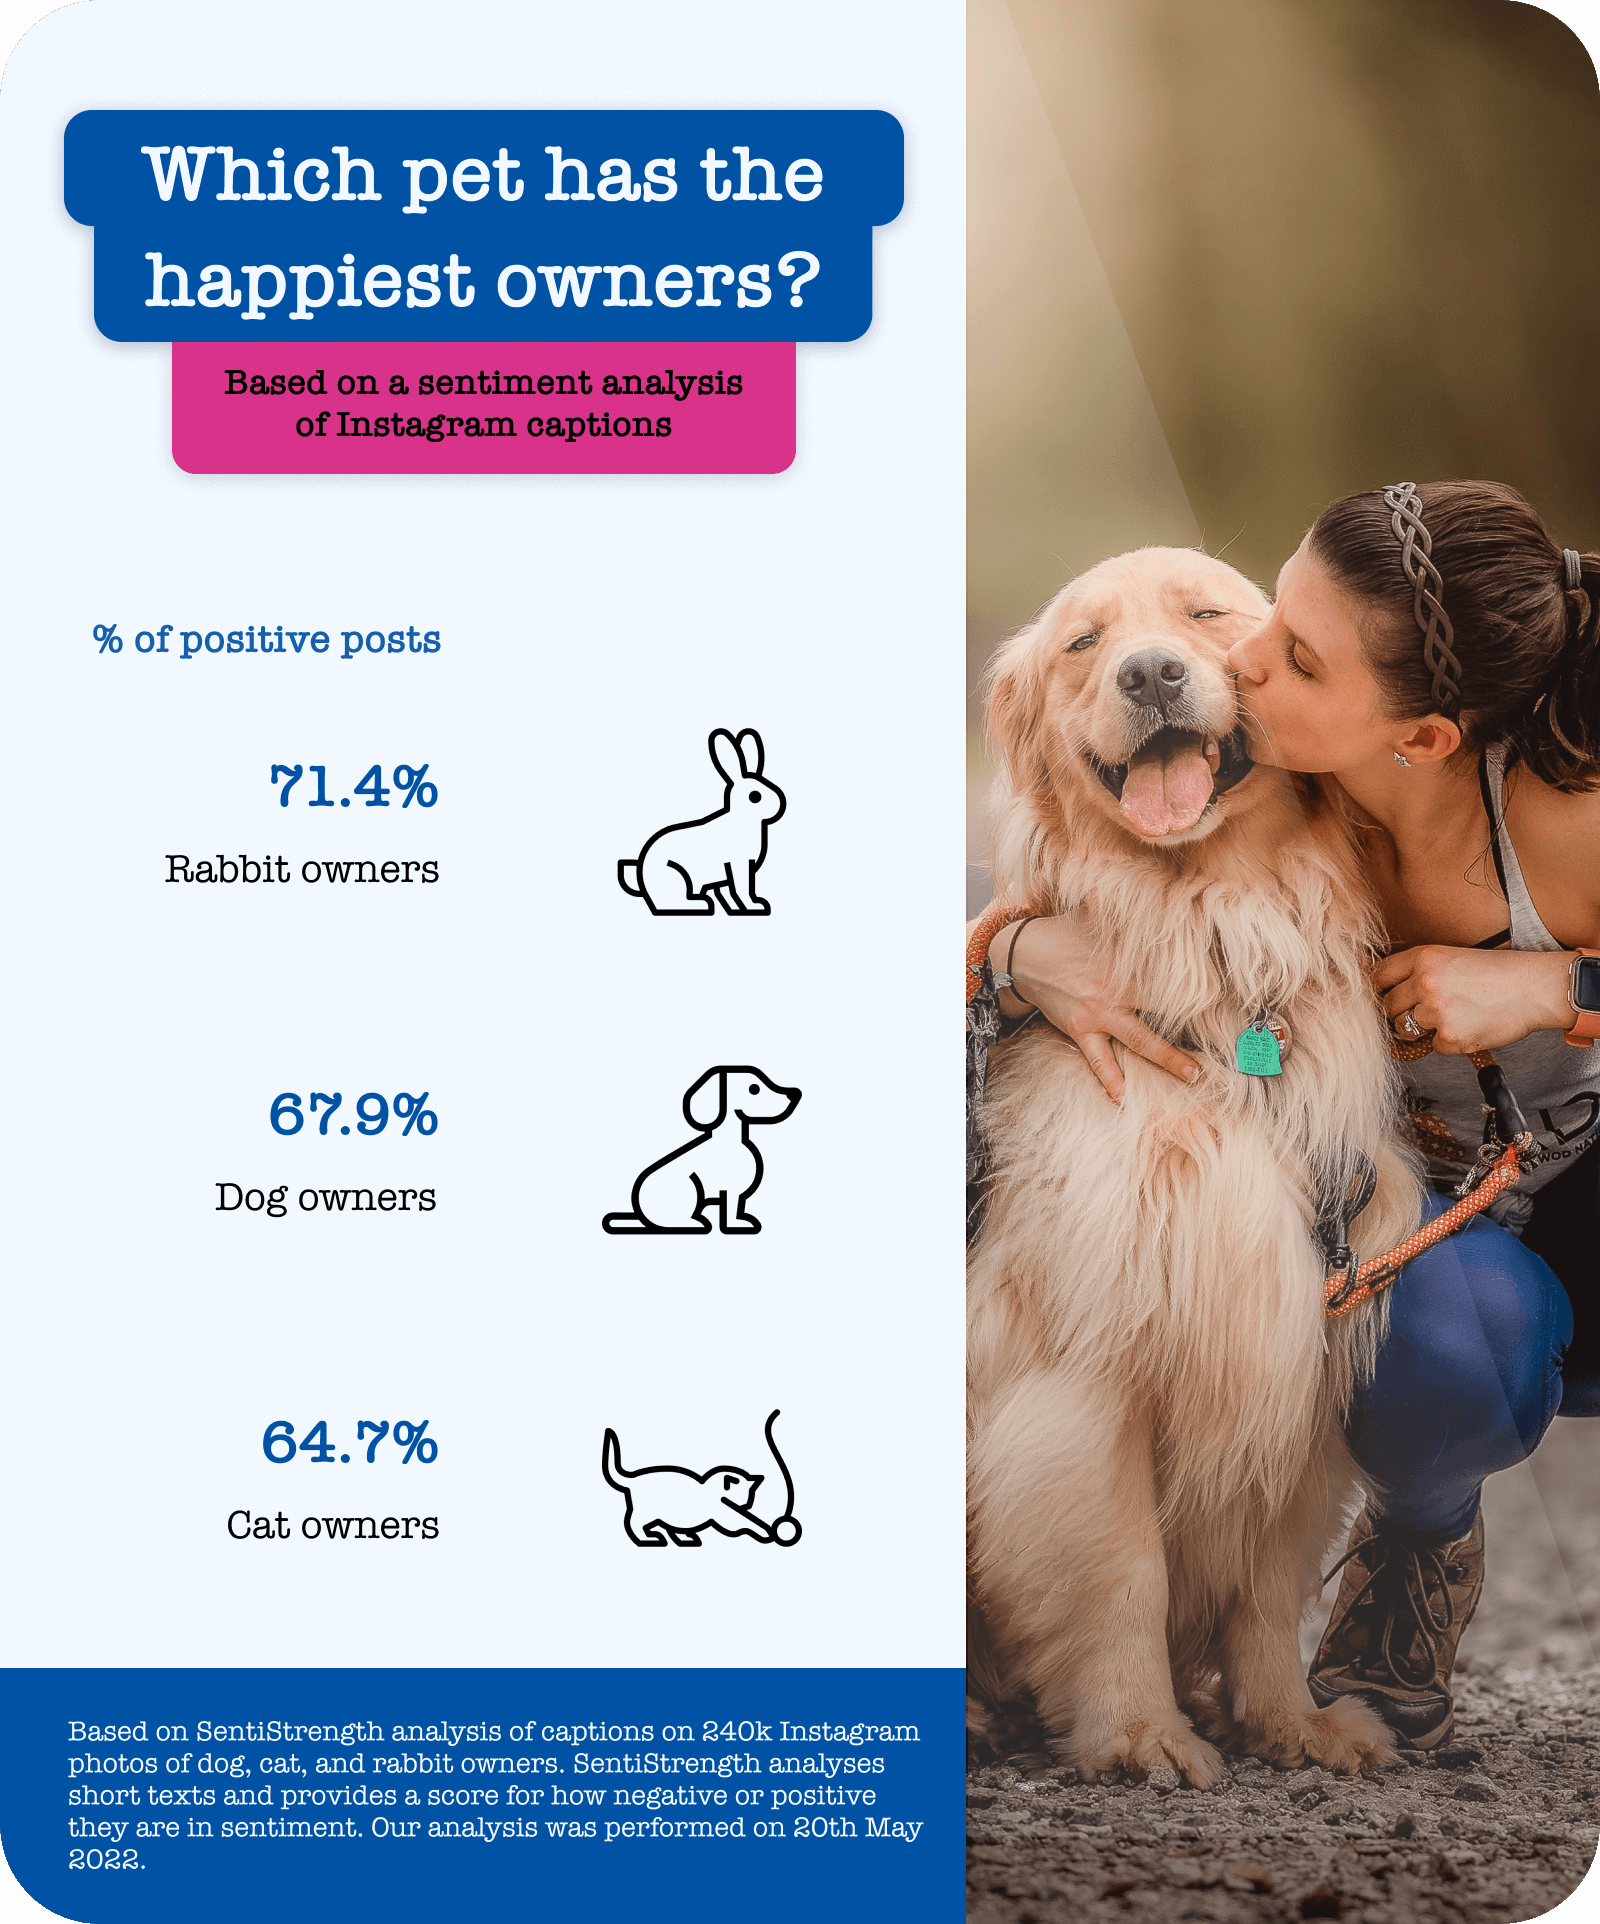 which pet has the happiest owner?